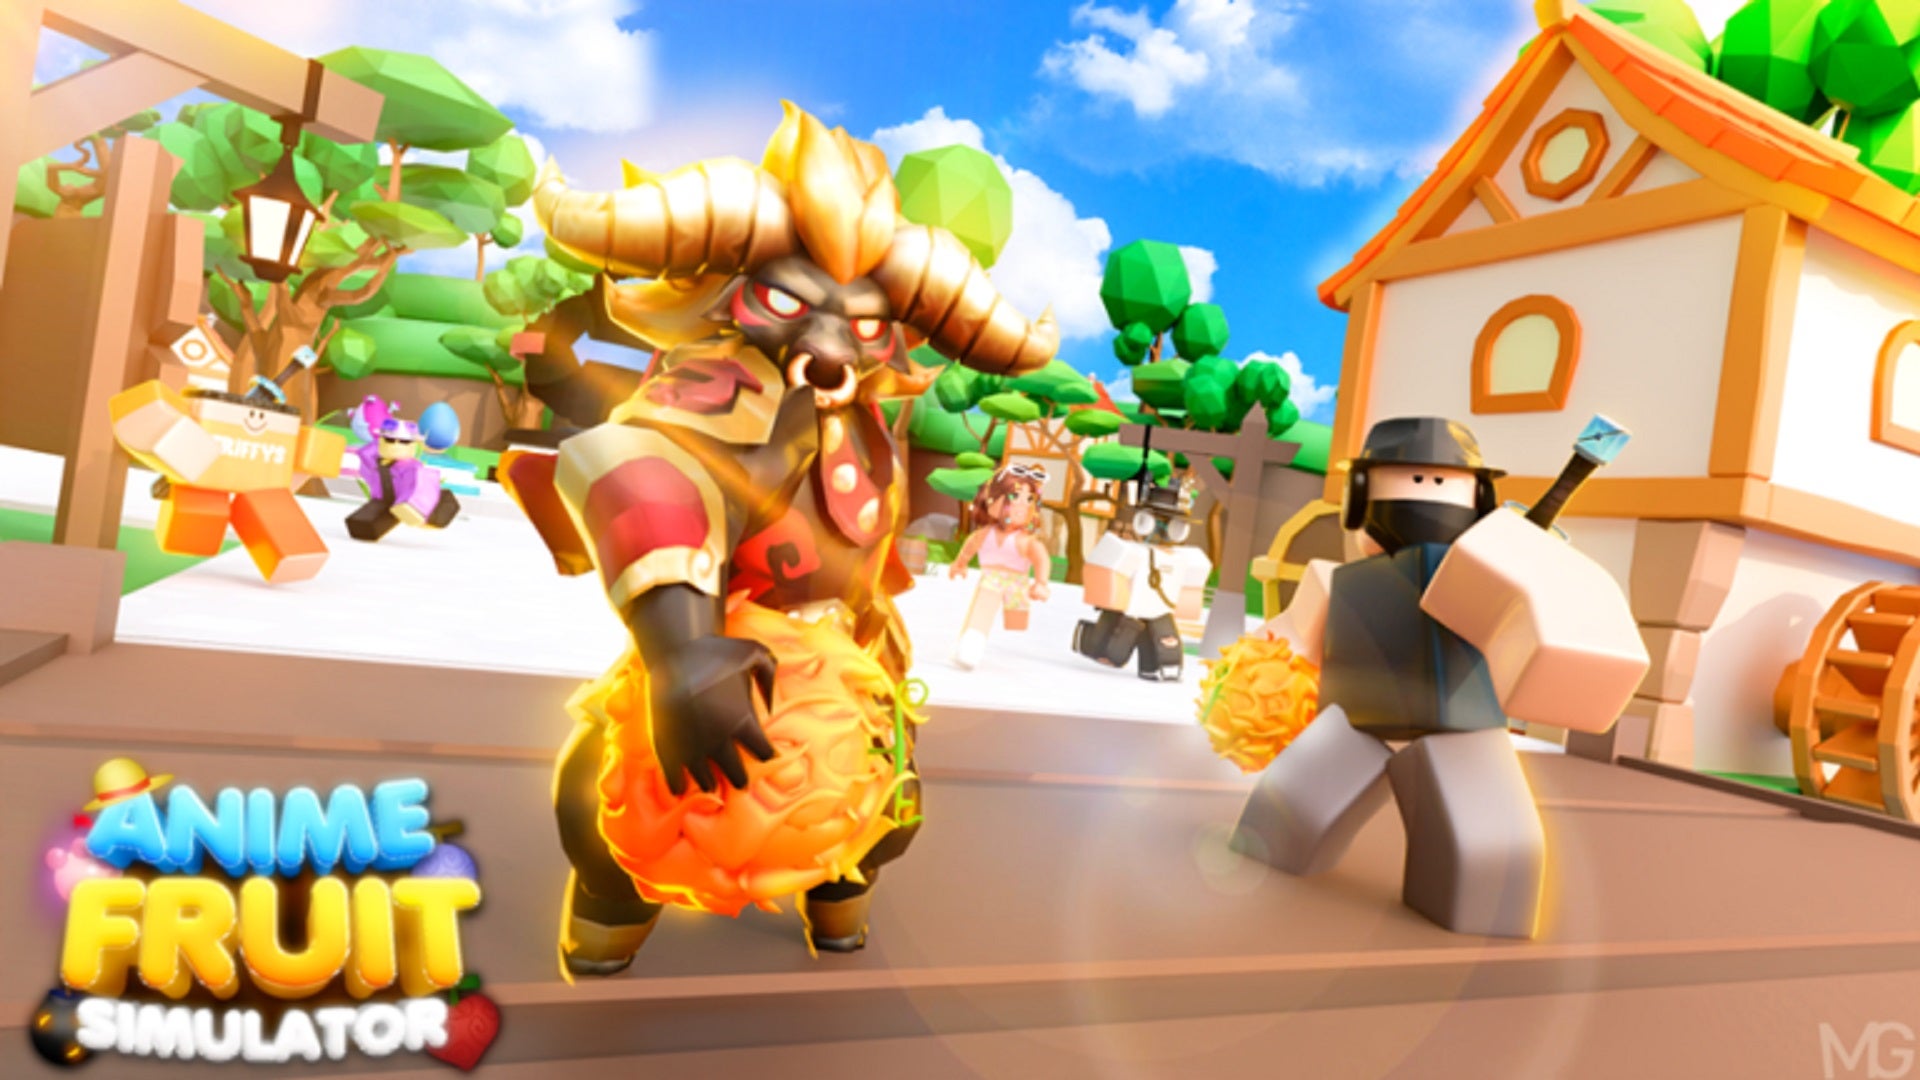 A Roblox character and a bull-headed humanoid strike dramatic poses against the backdrop of a brightly coloured village. The Anime Fruit Simulator logo is visible in the image's lower left-hand corner.